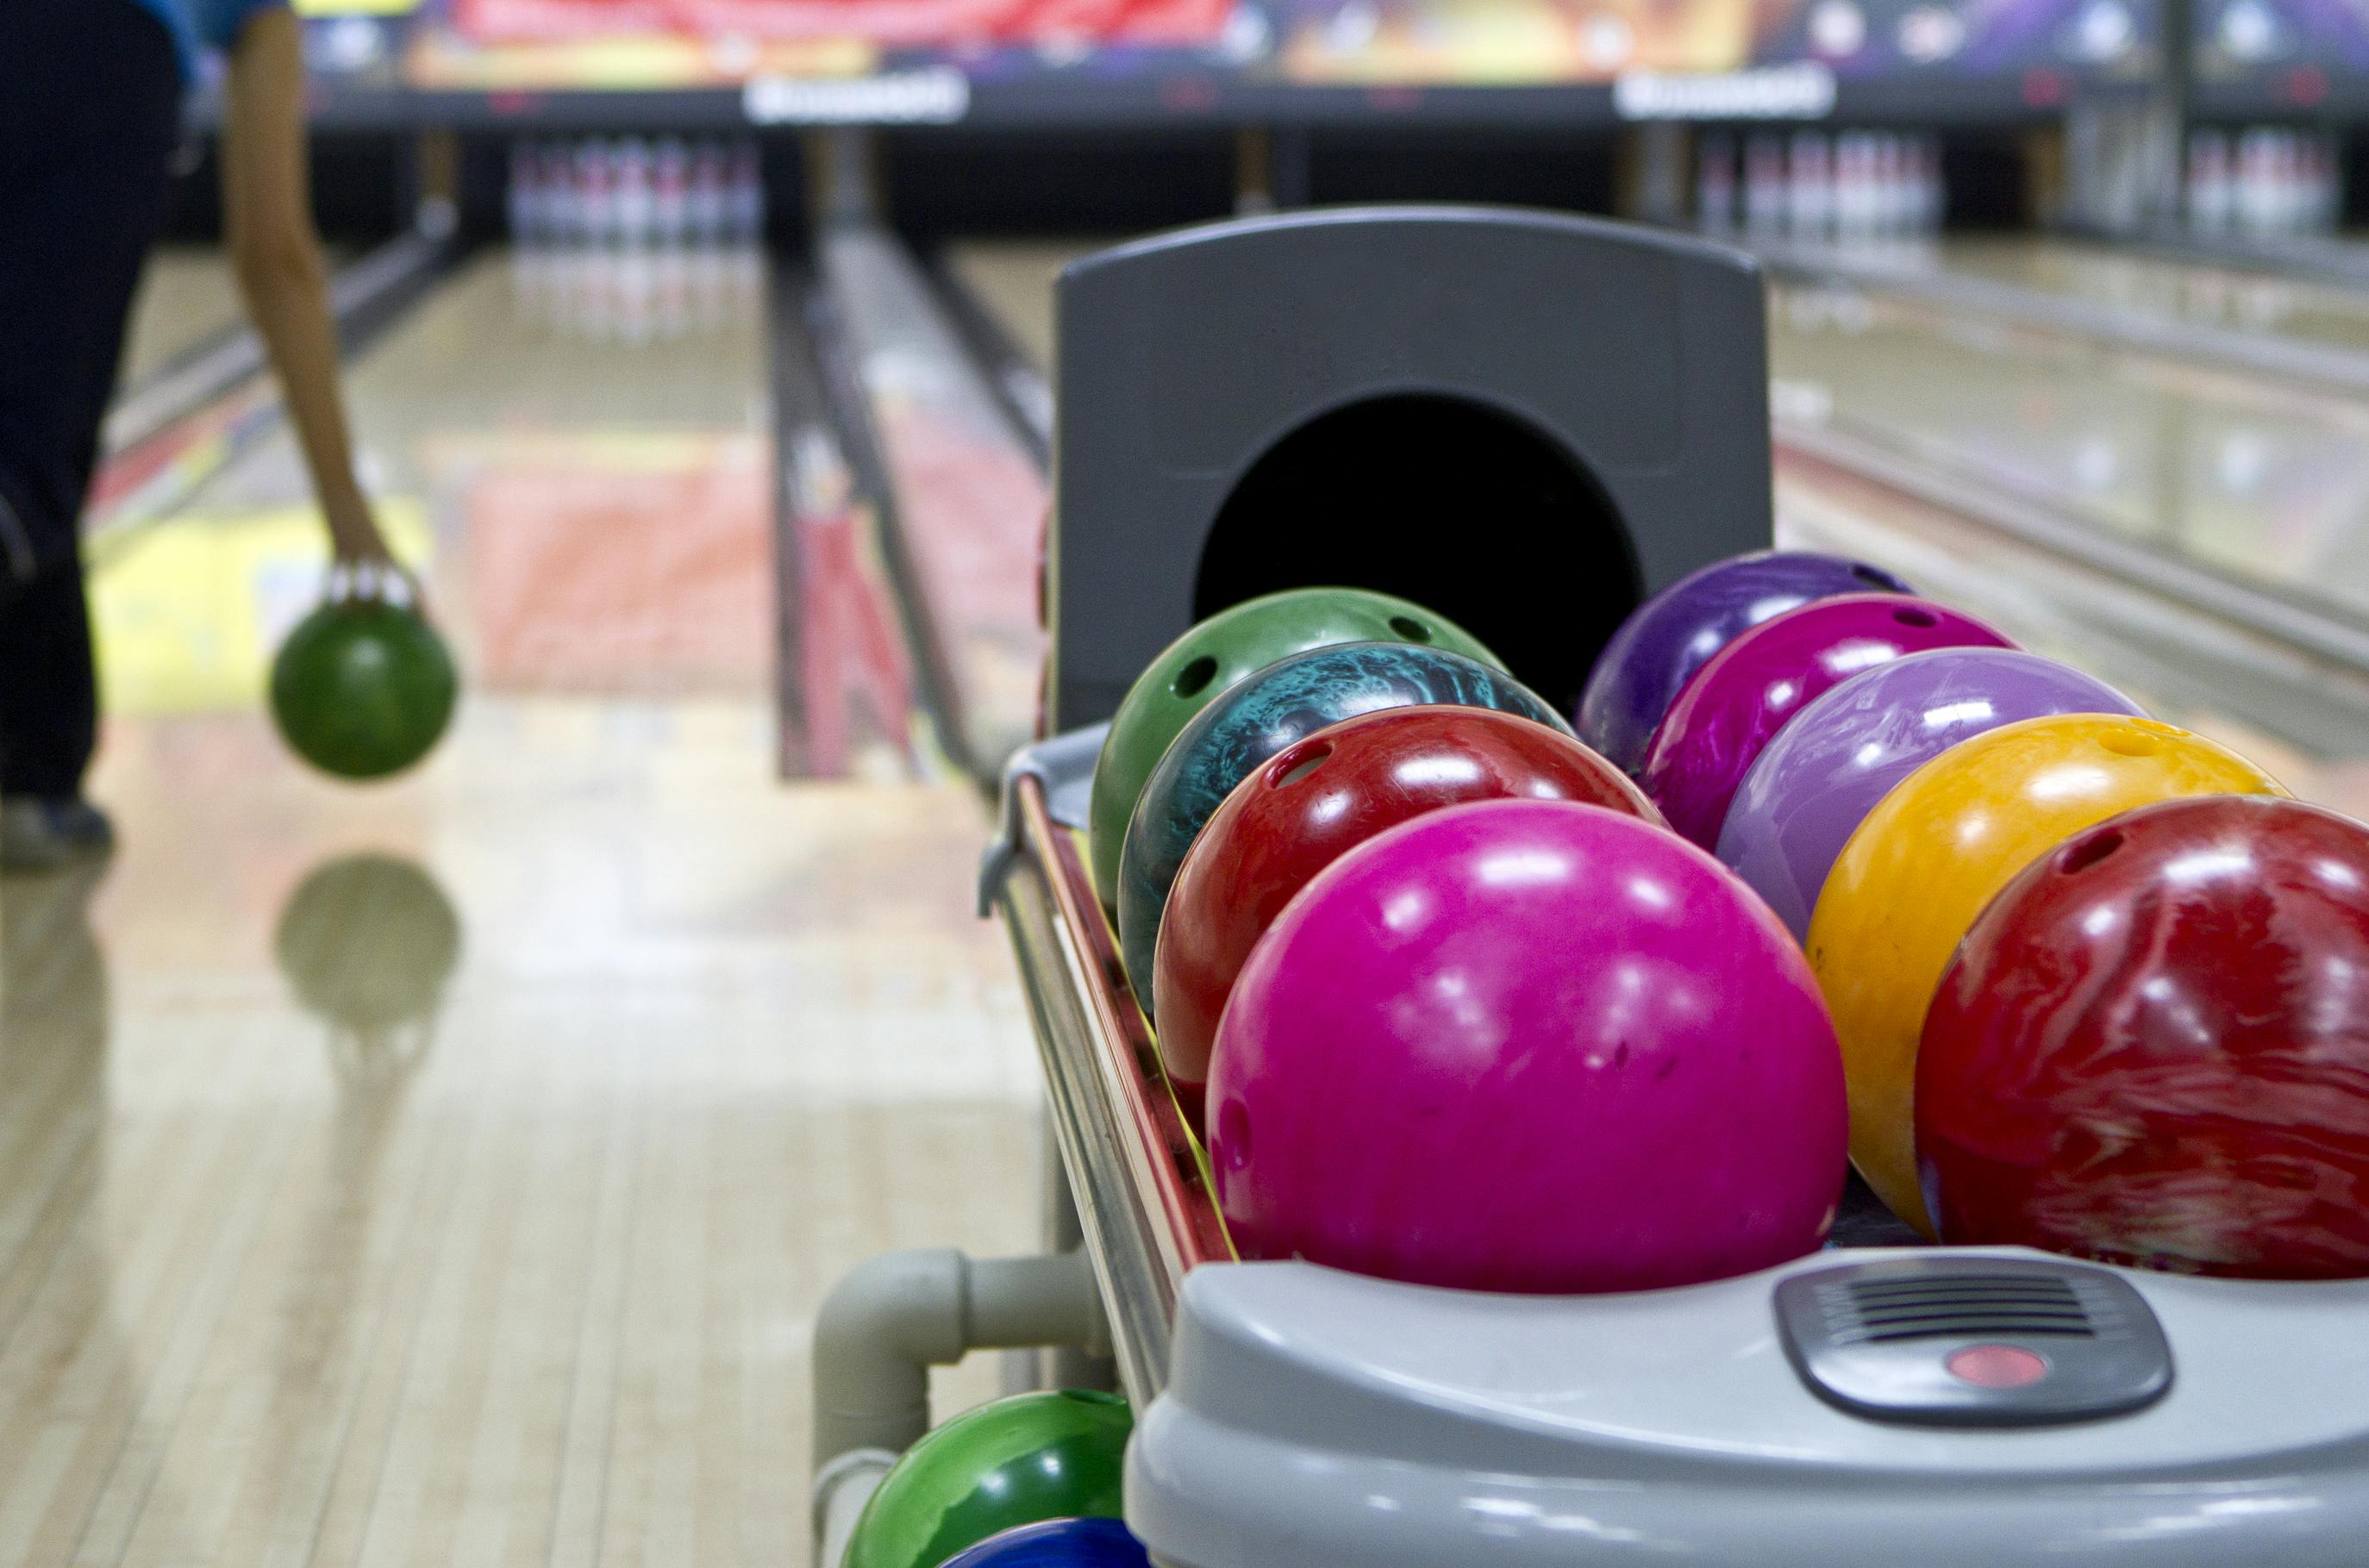 Bowling balls at a bowling alley with a person in the background about to throw their ball down the alley